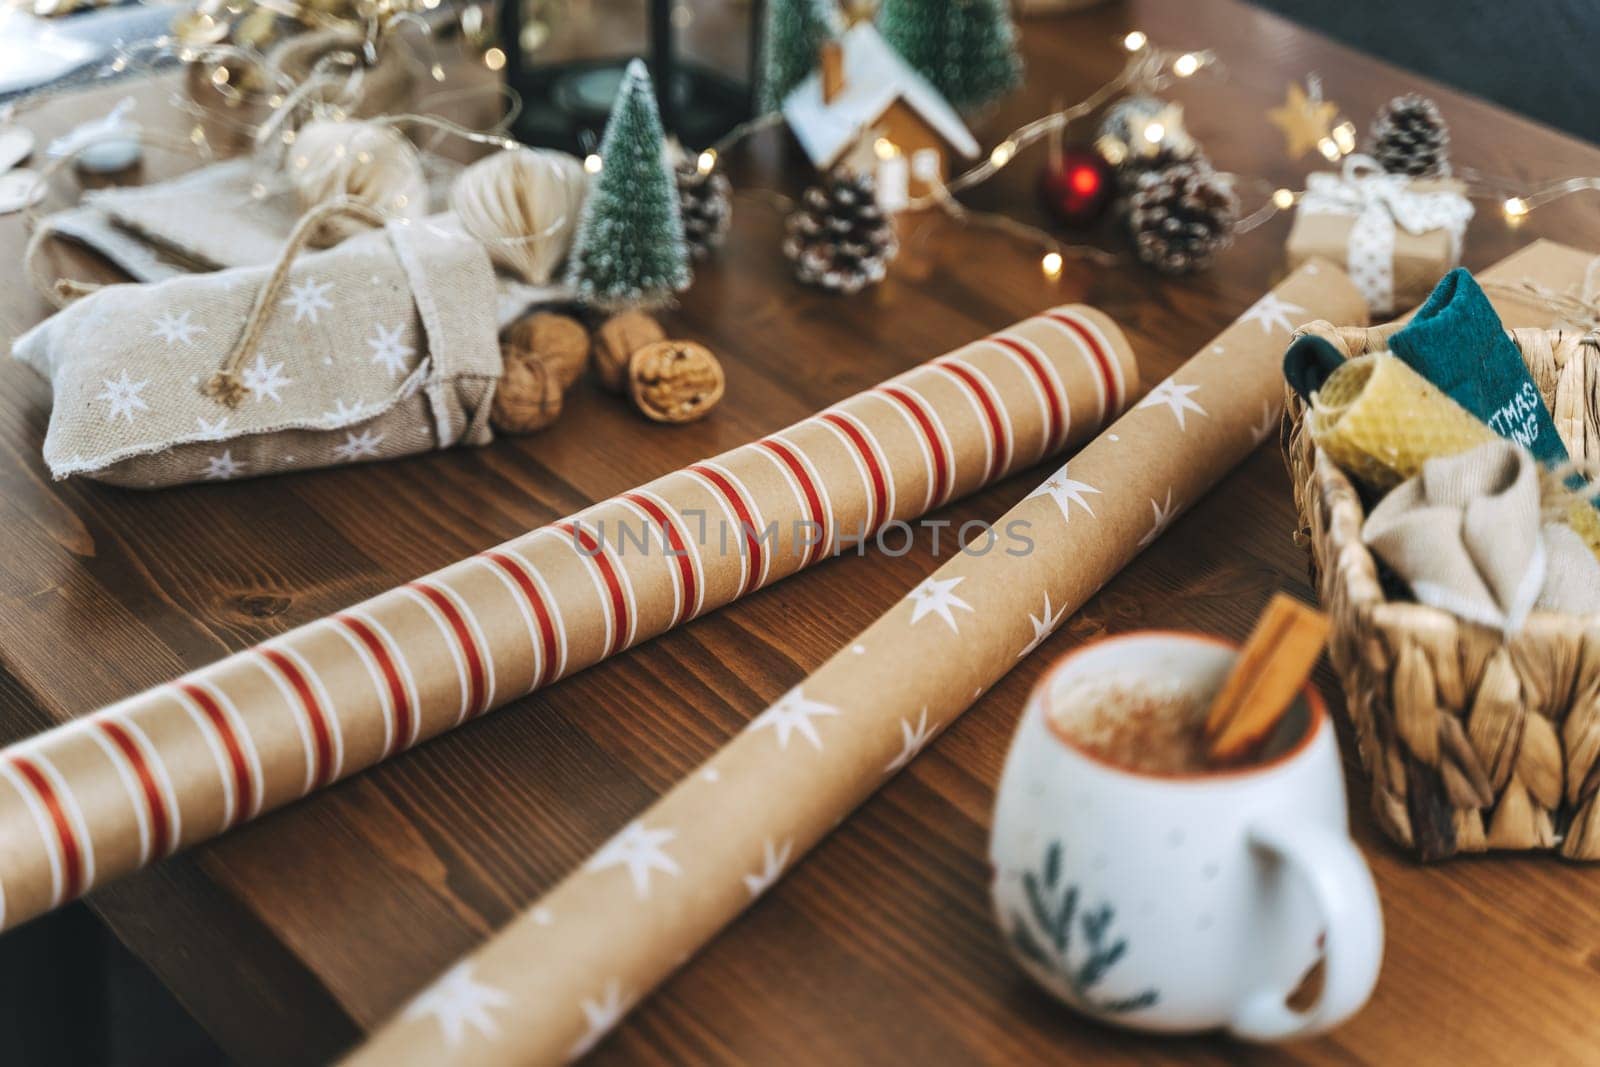 Preparing Christmas eco gift. Wrapping paper, wicker basket, coffee cup. Unprepared presents on wooden table with natural decor elements and items Christmas packing wrapping Concept.